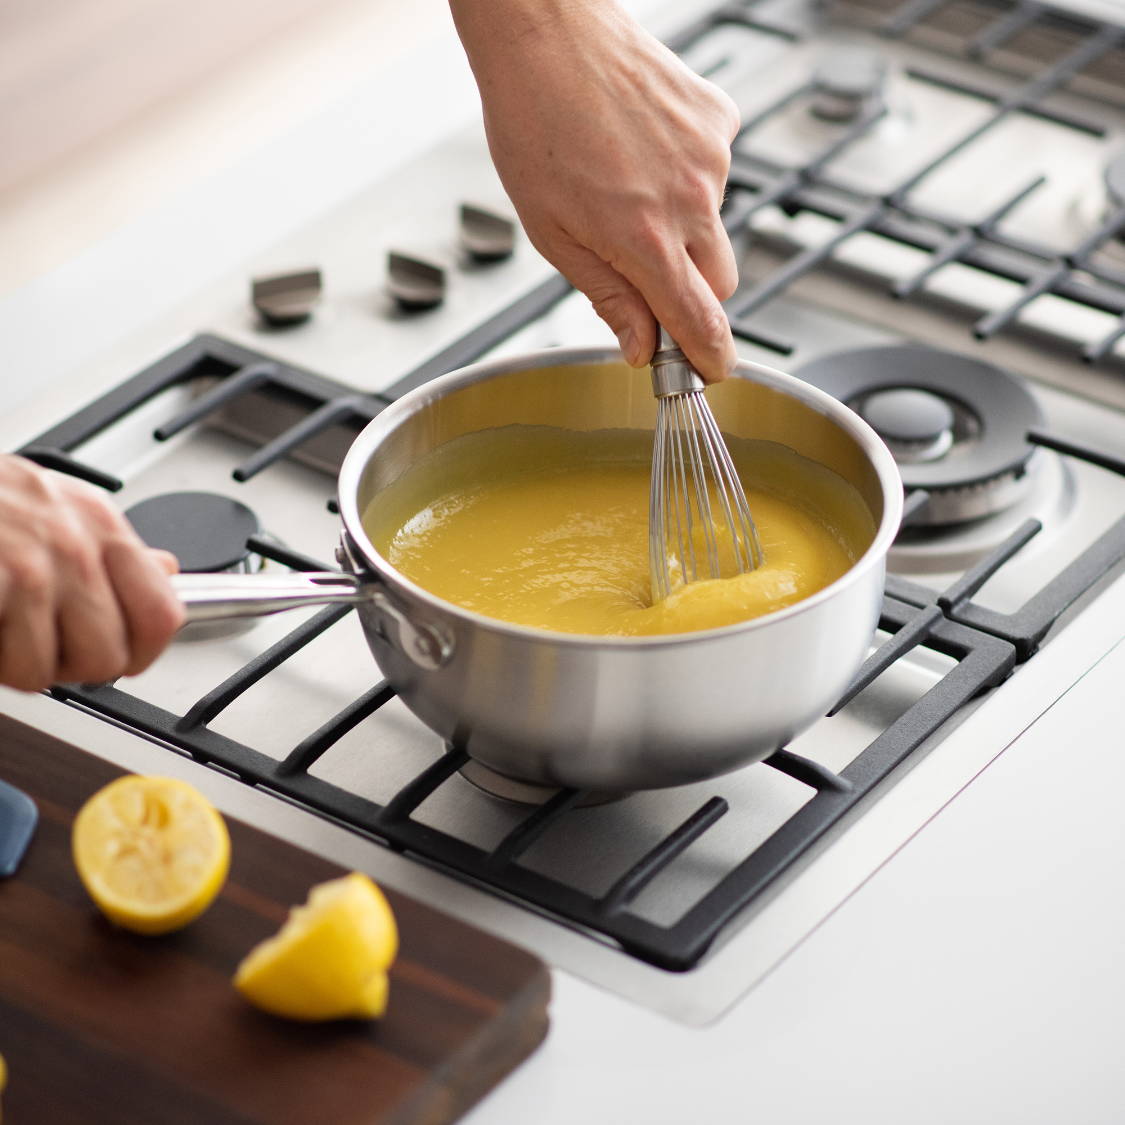 The Misen Saucier actually makes you a better chef thanks to some thoughtful design tweaks from your typical pot.